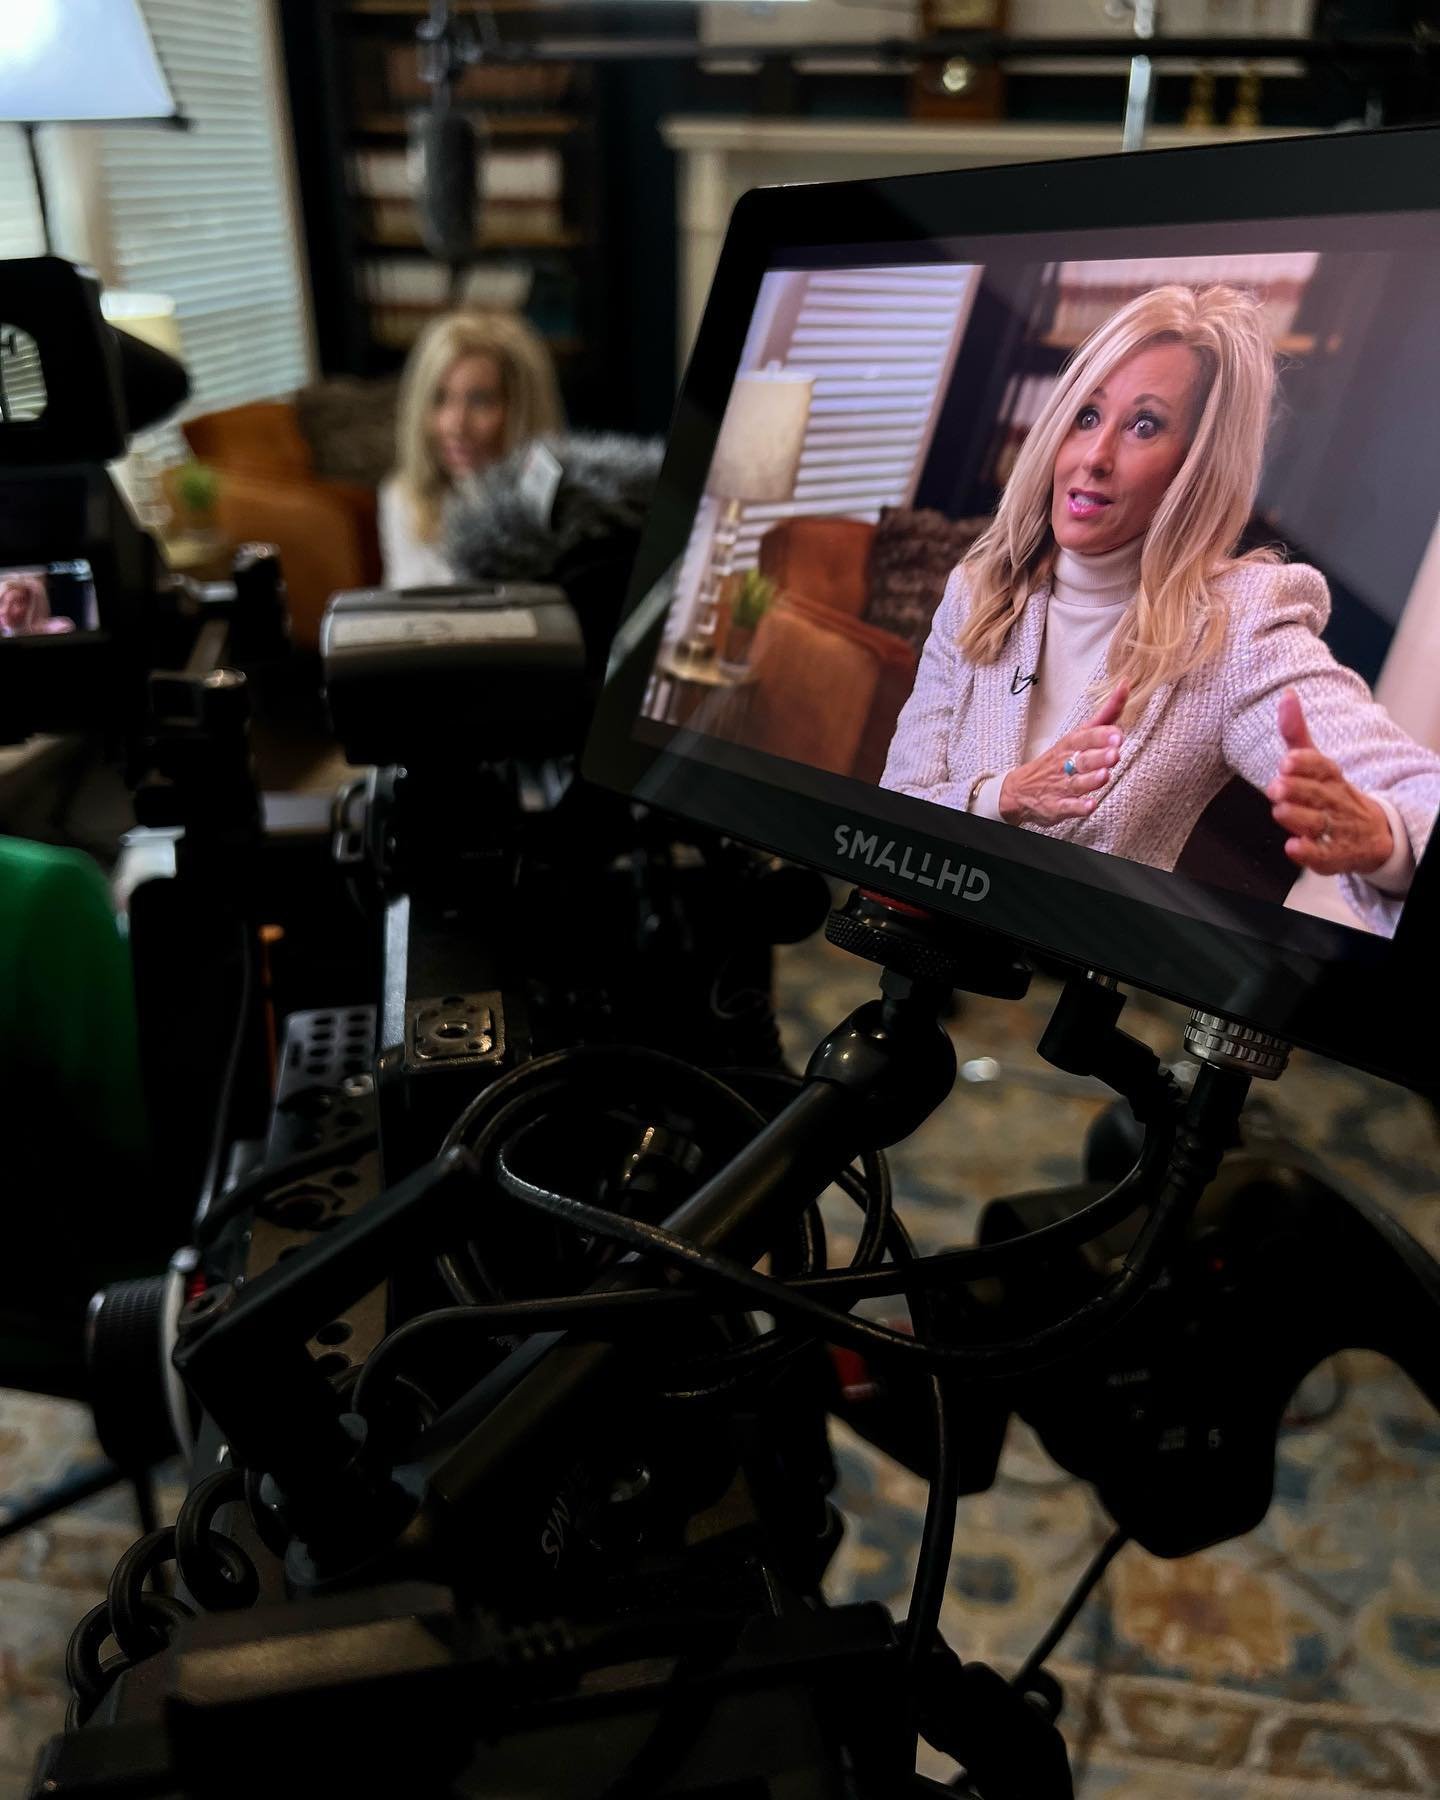 Interview today with Beth Moore for @cbnnews with @charnewslady
#houstonfilmcrew #sony #zeiss #smallhd #brighttangerine